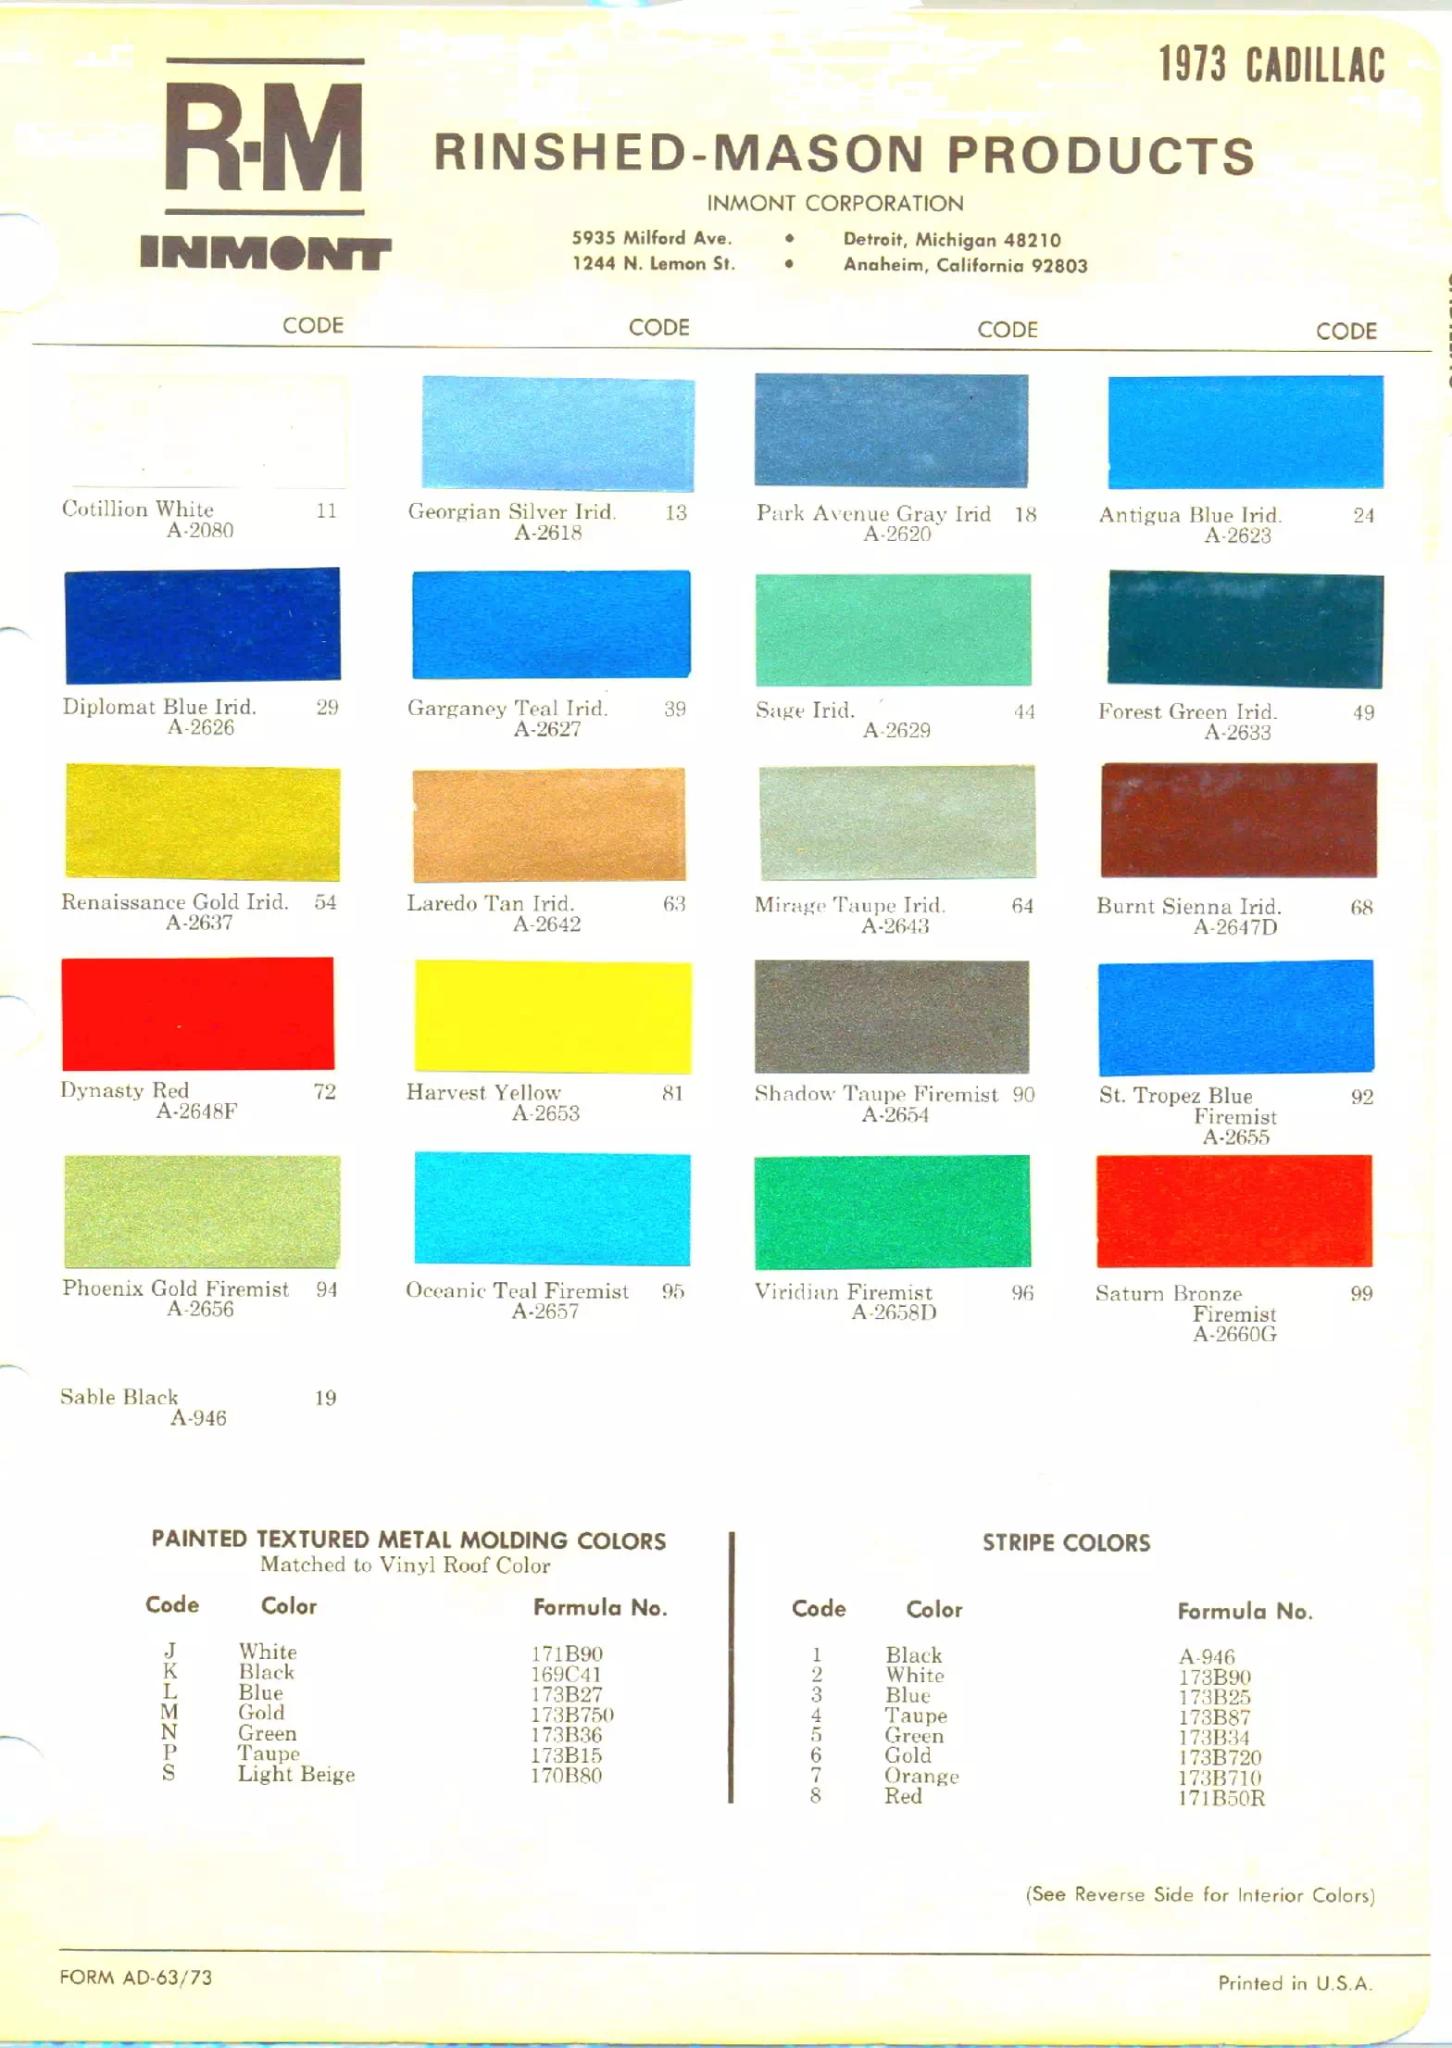 General Motors Vehicle Paint Codes for matching paint